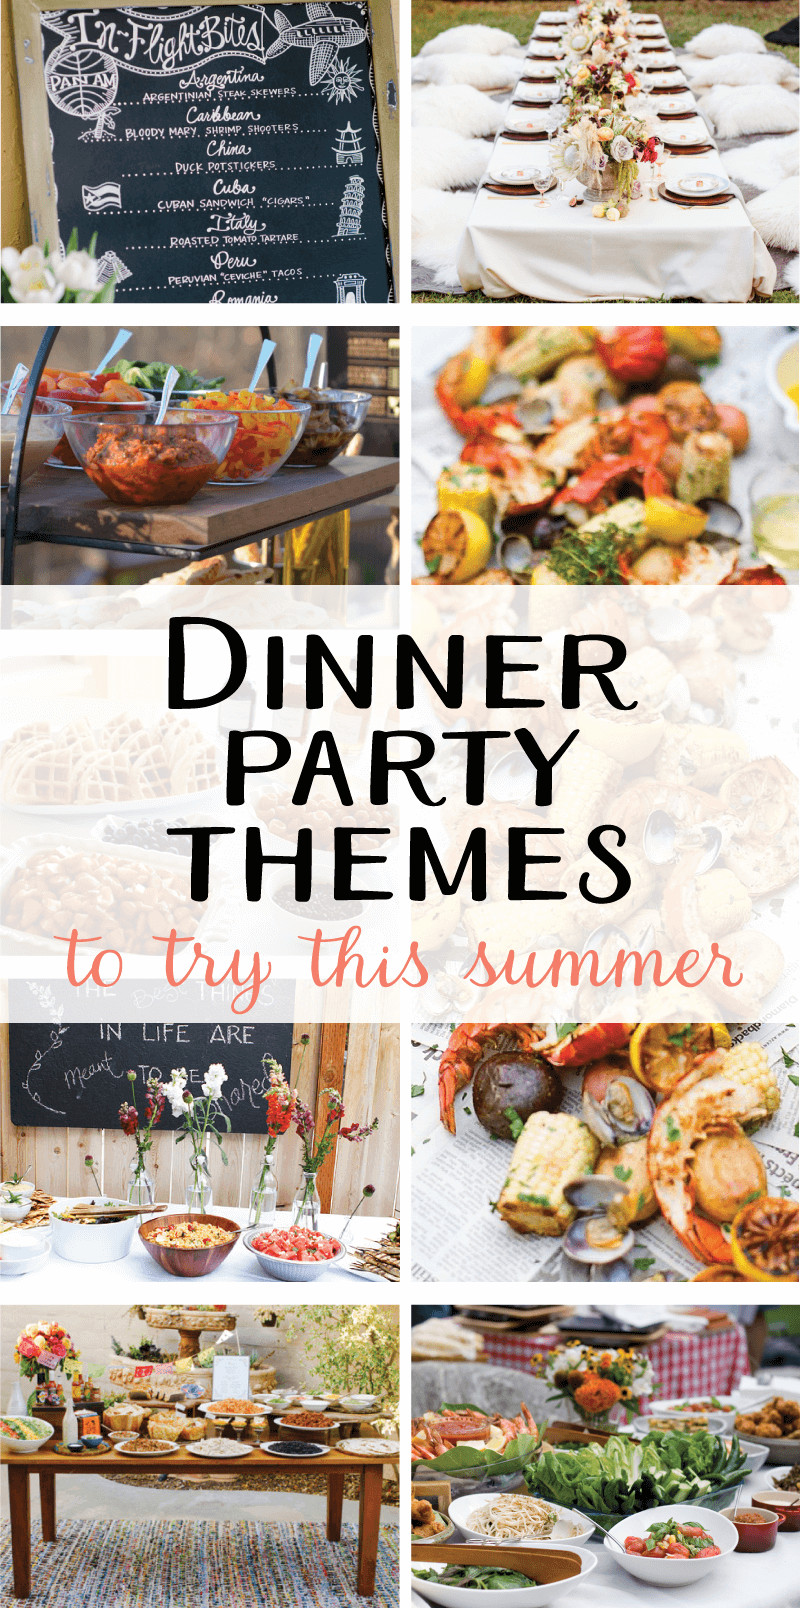 Summer Dinner Party Recipe Ideas
 9 Creative Dinner Party Themes to Try this Summer on